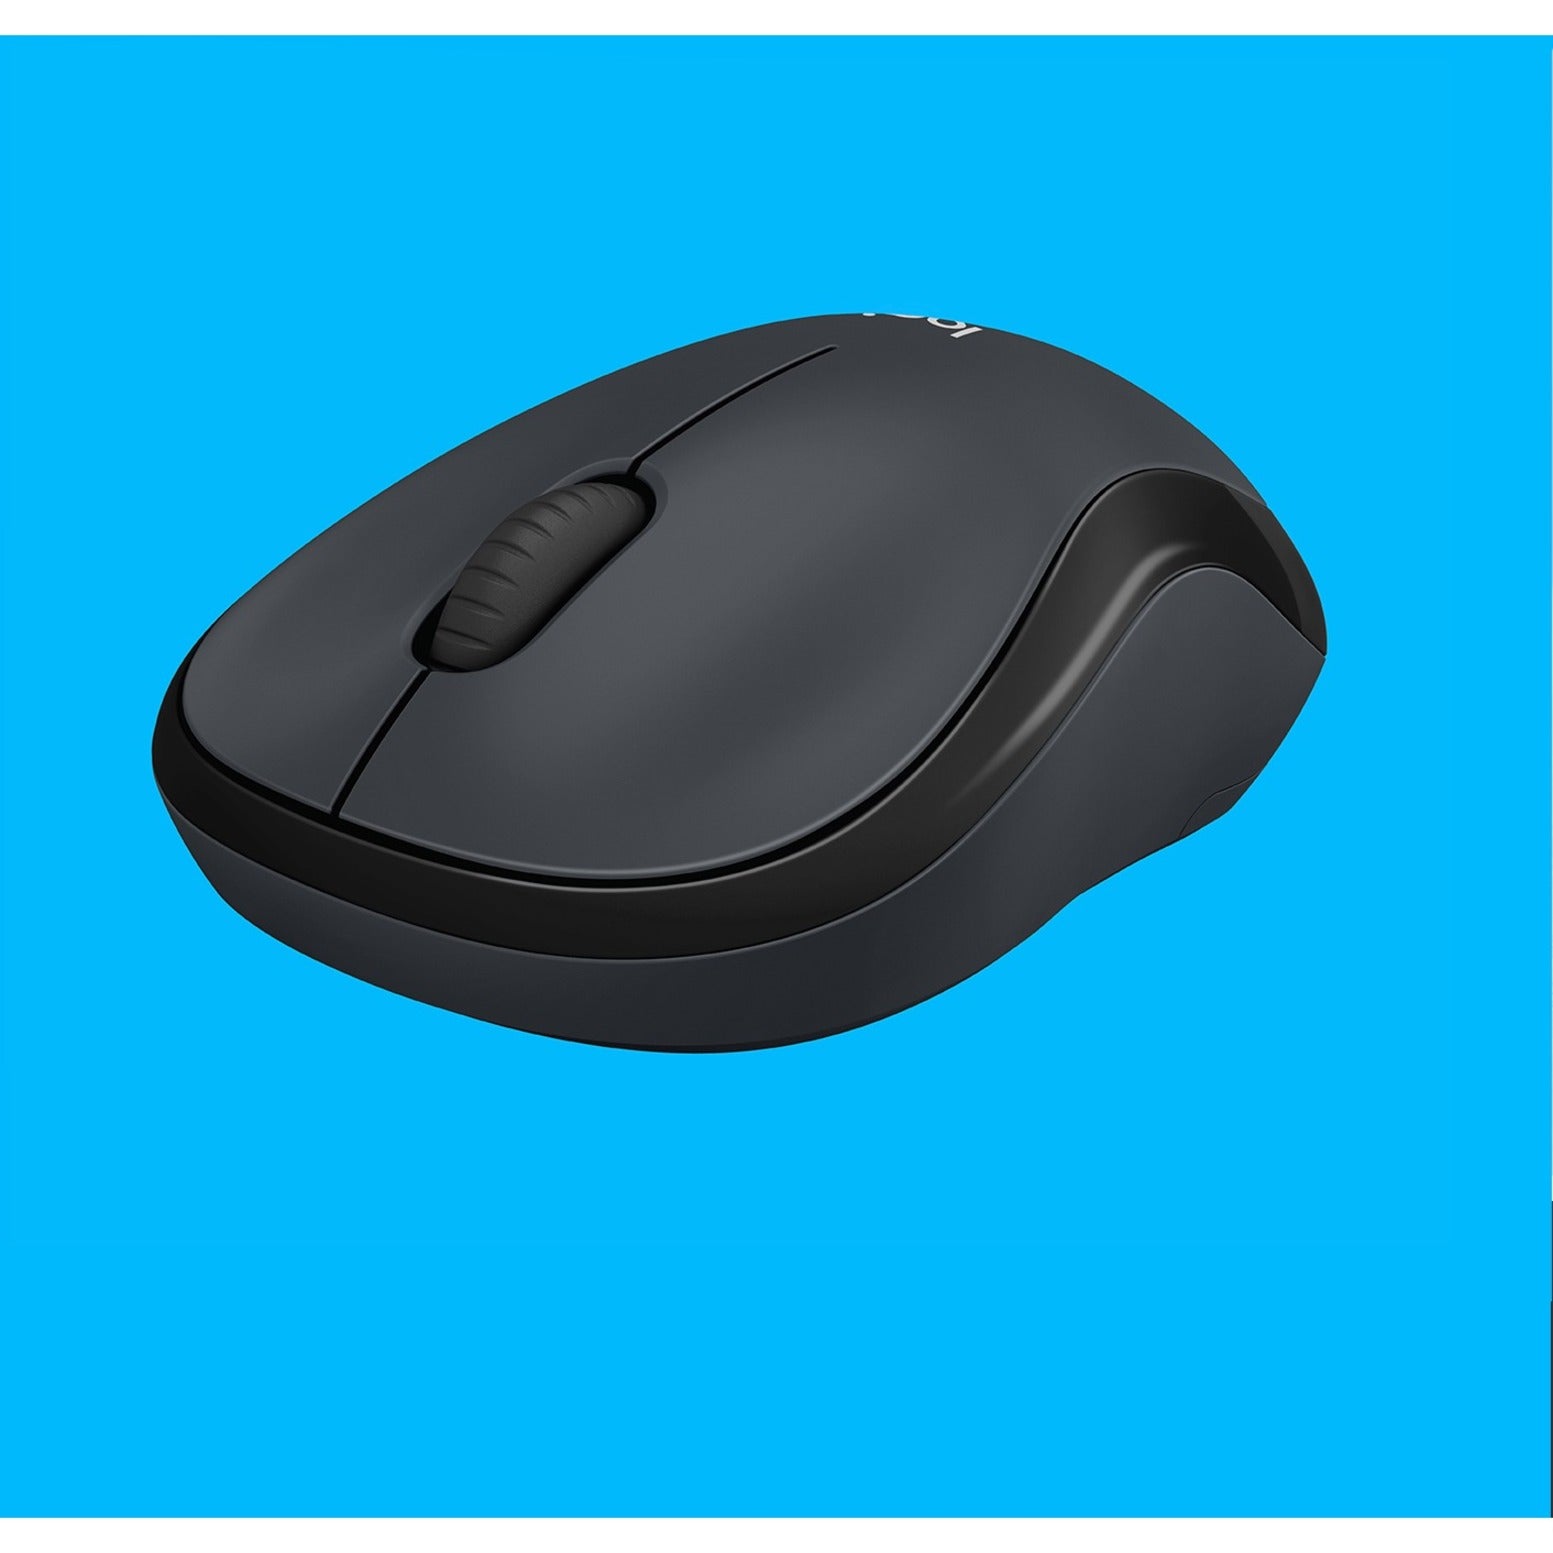 Logitech 910-006127 M220 Silent Wireless Mouse, 2.4 GHz with USB Receiver, 1000 DPI Optical Tracking, 18-Month Battery